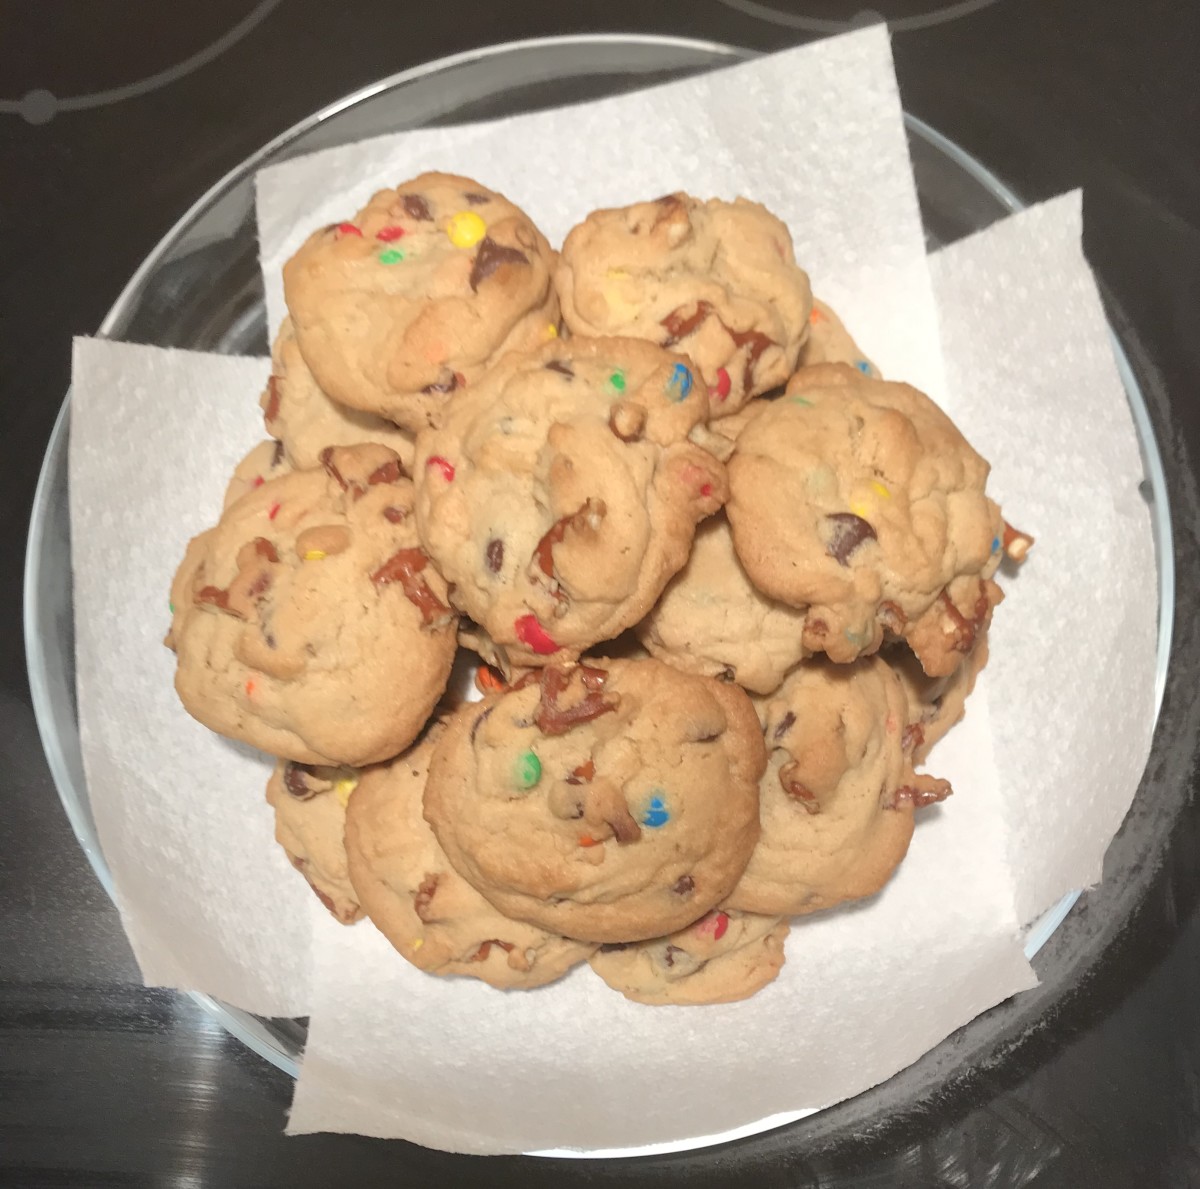 Kitchen Sink Cookies made with chocolates and pretzels. 